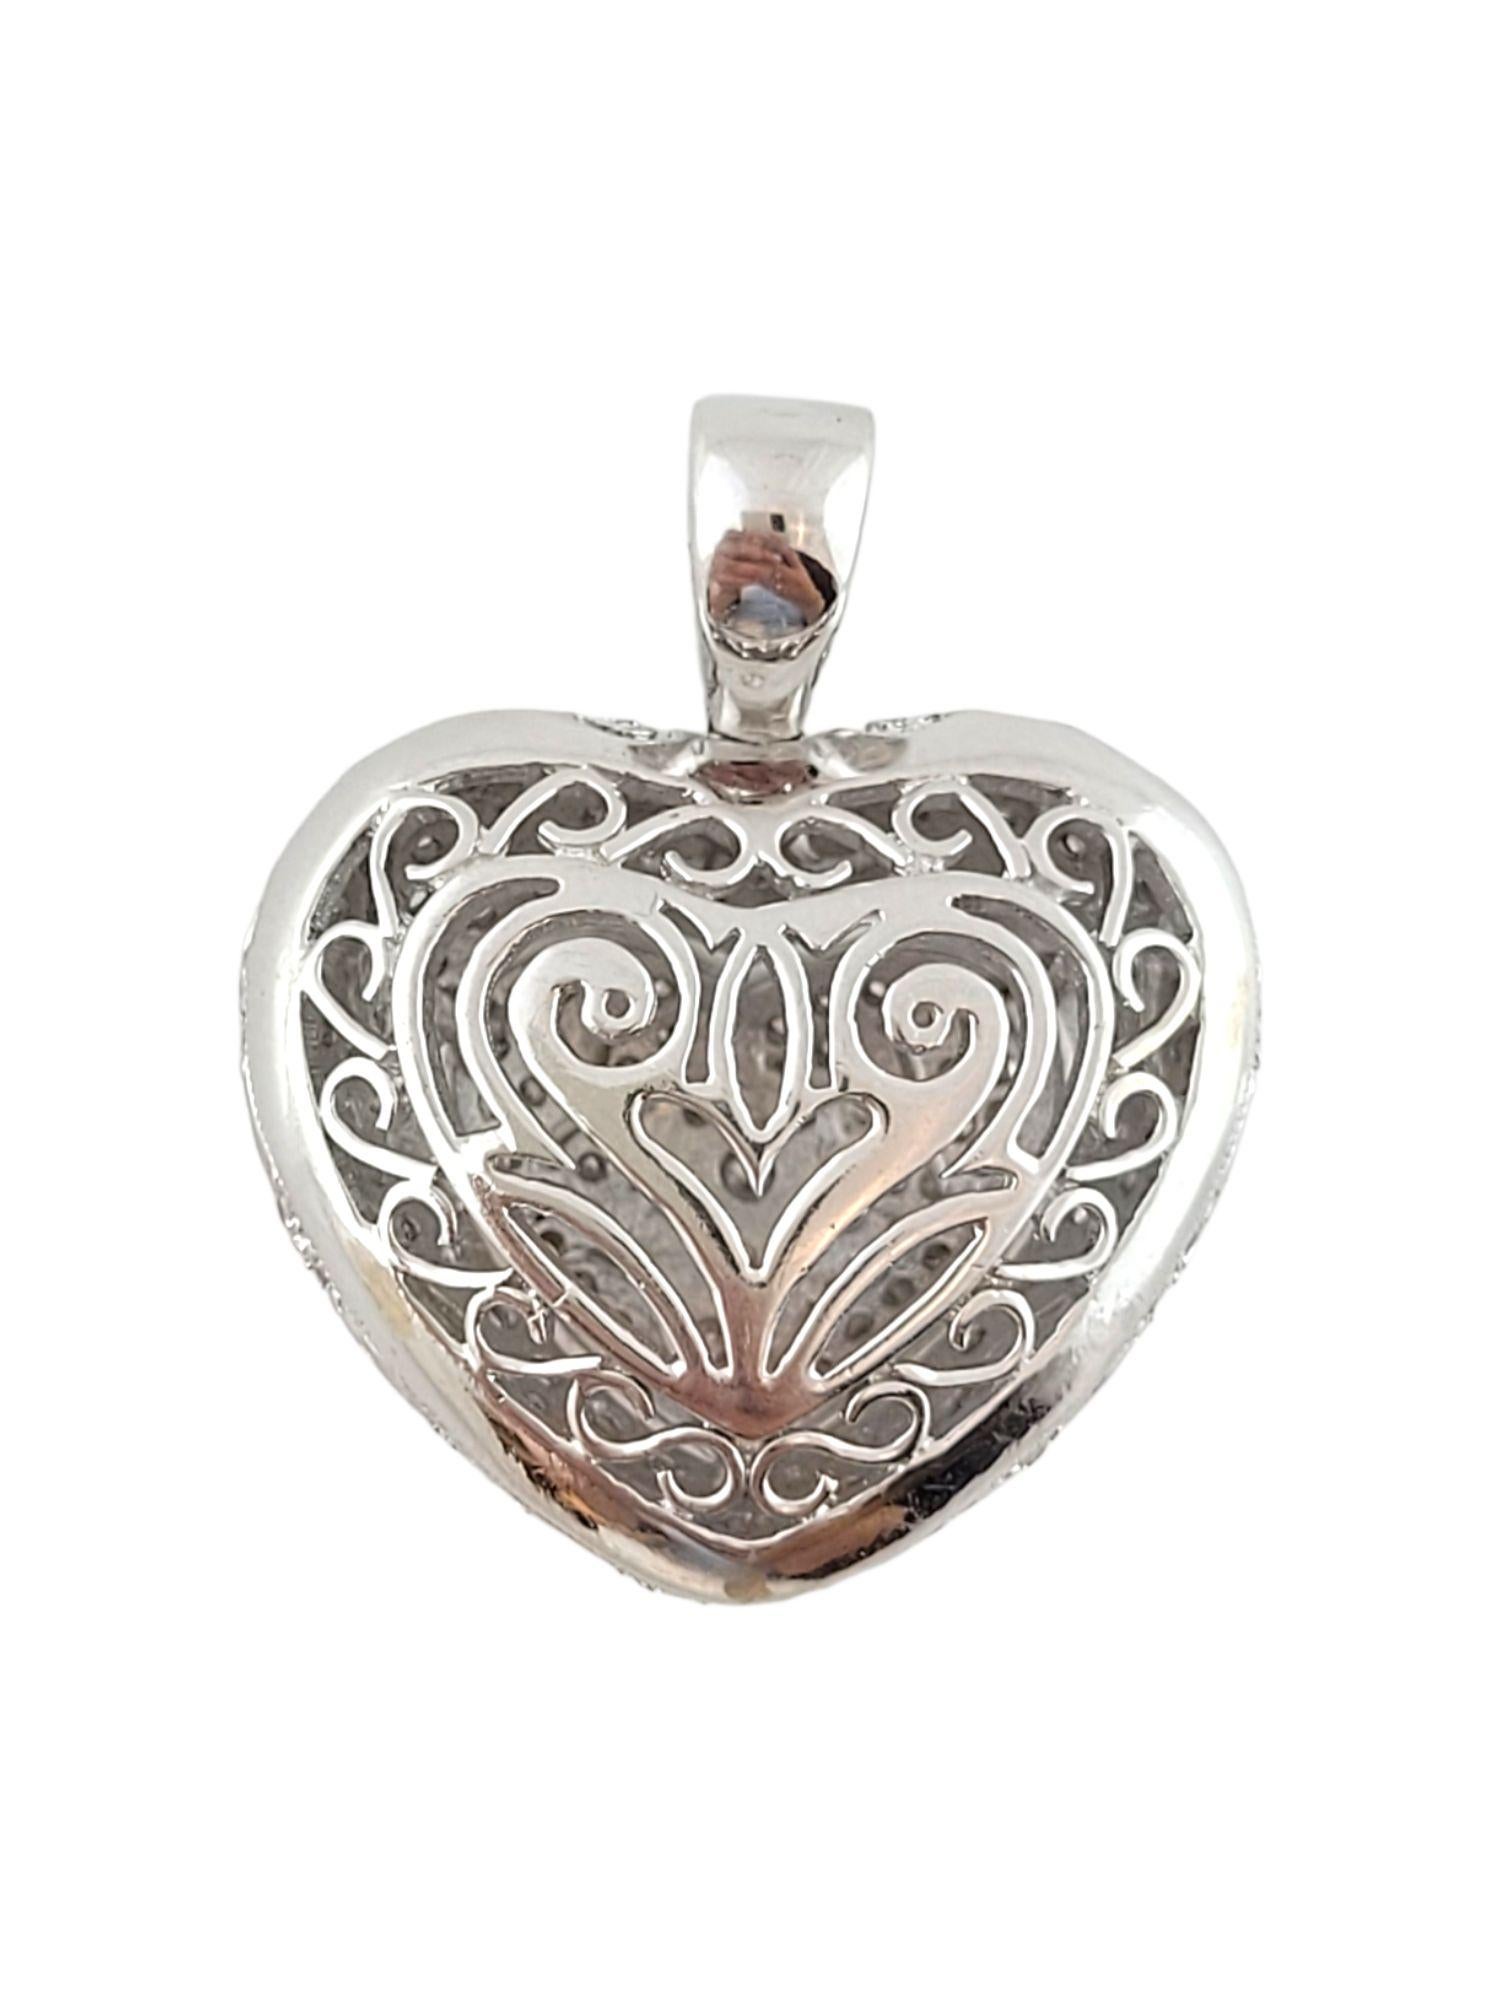 This gorgeous hollow heart pendant is crafted from 14K white gold and is decorated with 146 round brilliant cut diamonds for a beautiful, sparkling finish!

Approximate total diamond weight: 1.32 cttw

Diamond clarity: SI1-I1

Diamond color: